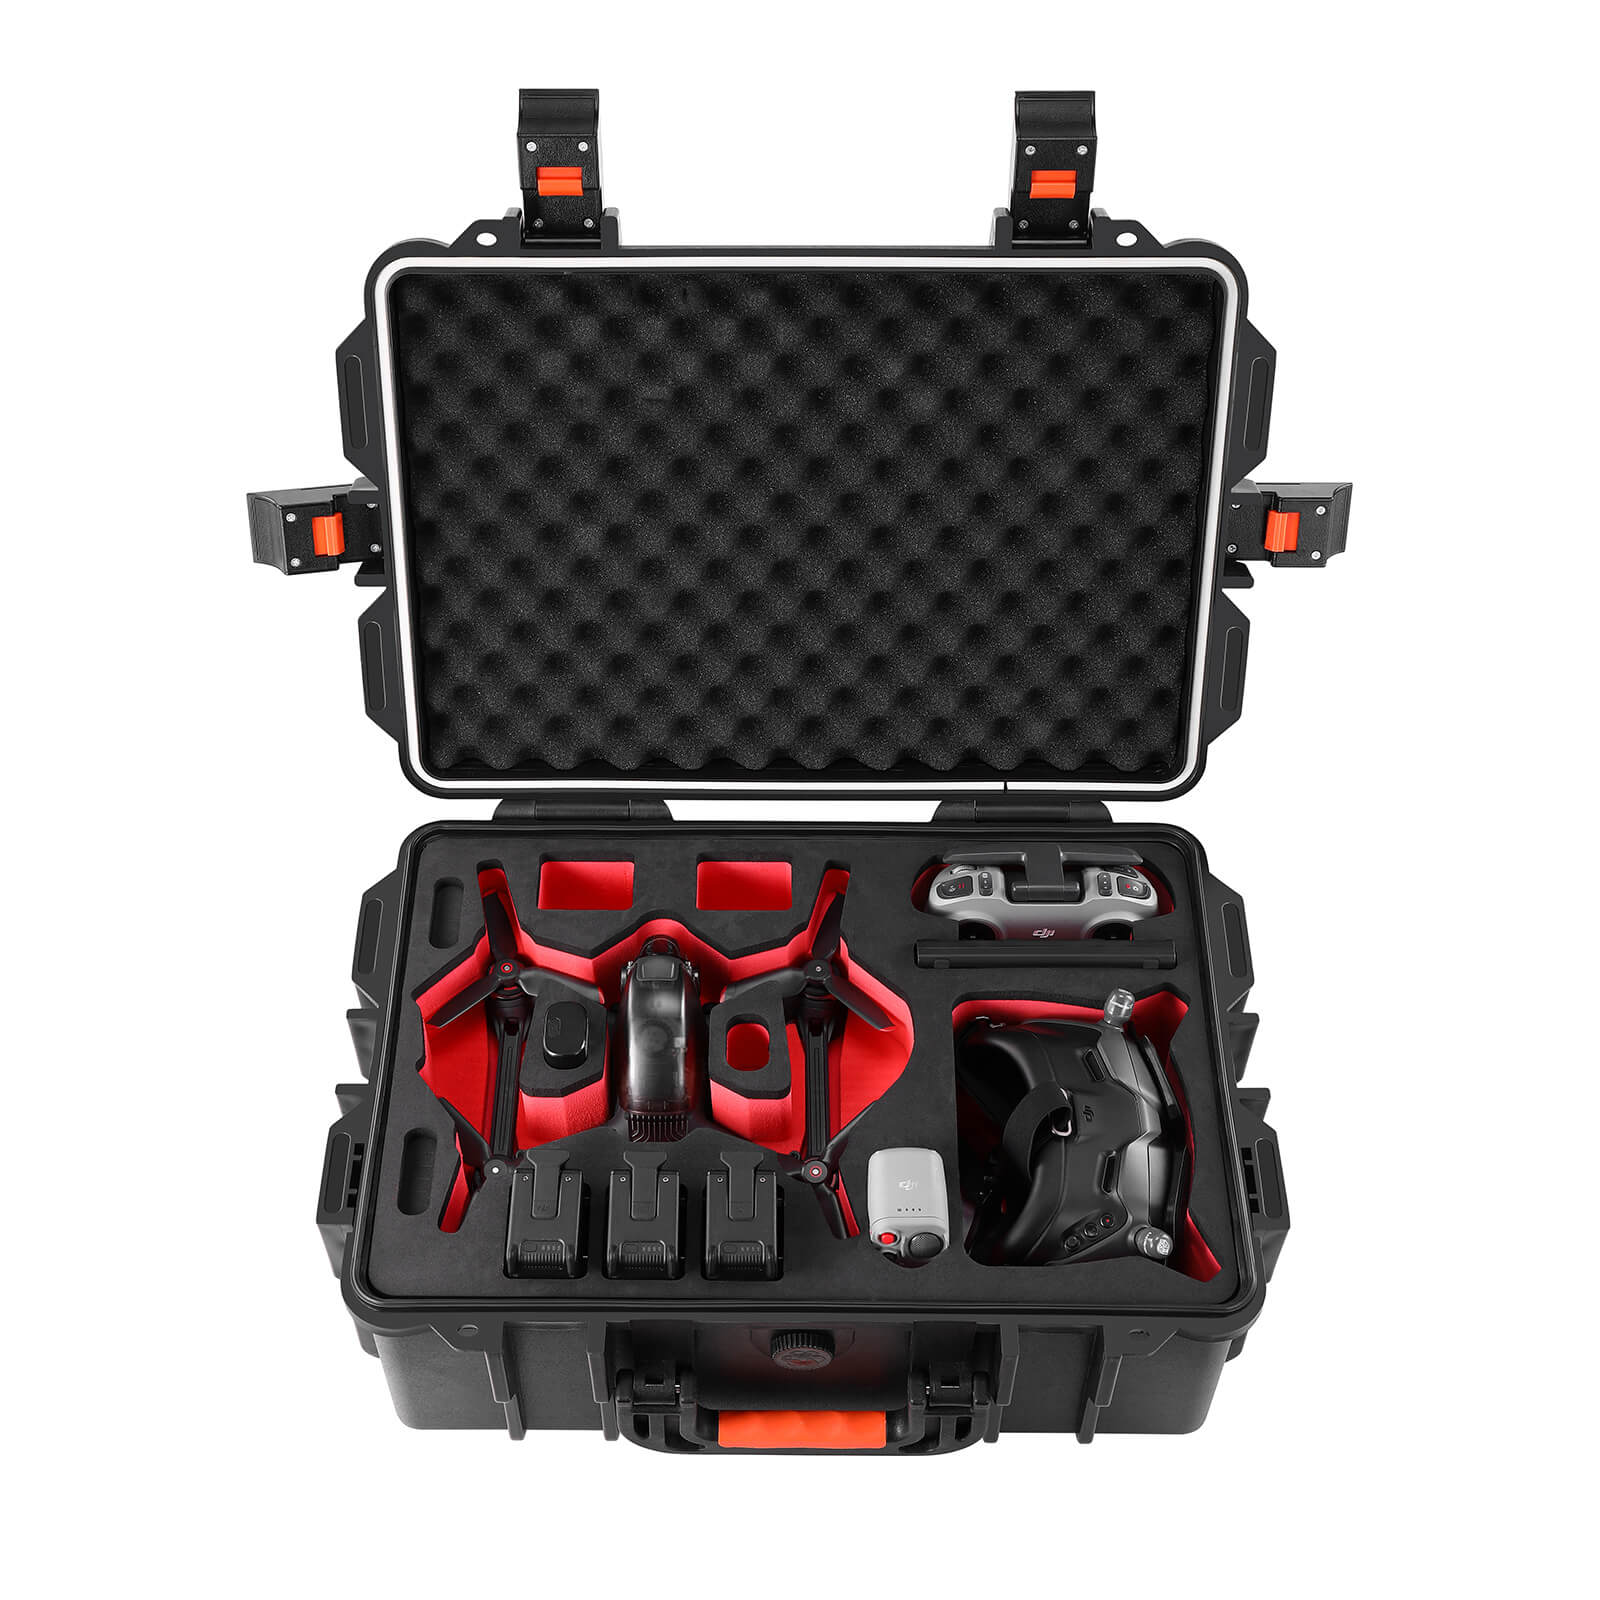 FPVtosky Professional Hard Case for DJI FPV Fits 6 batteries Case Only Keep Props On - DJI FPV Drone Carrying Case Accessories 